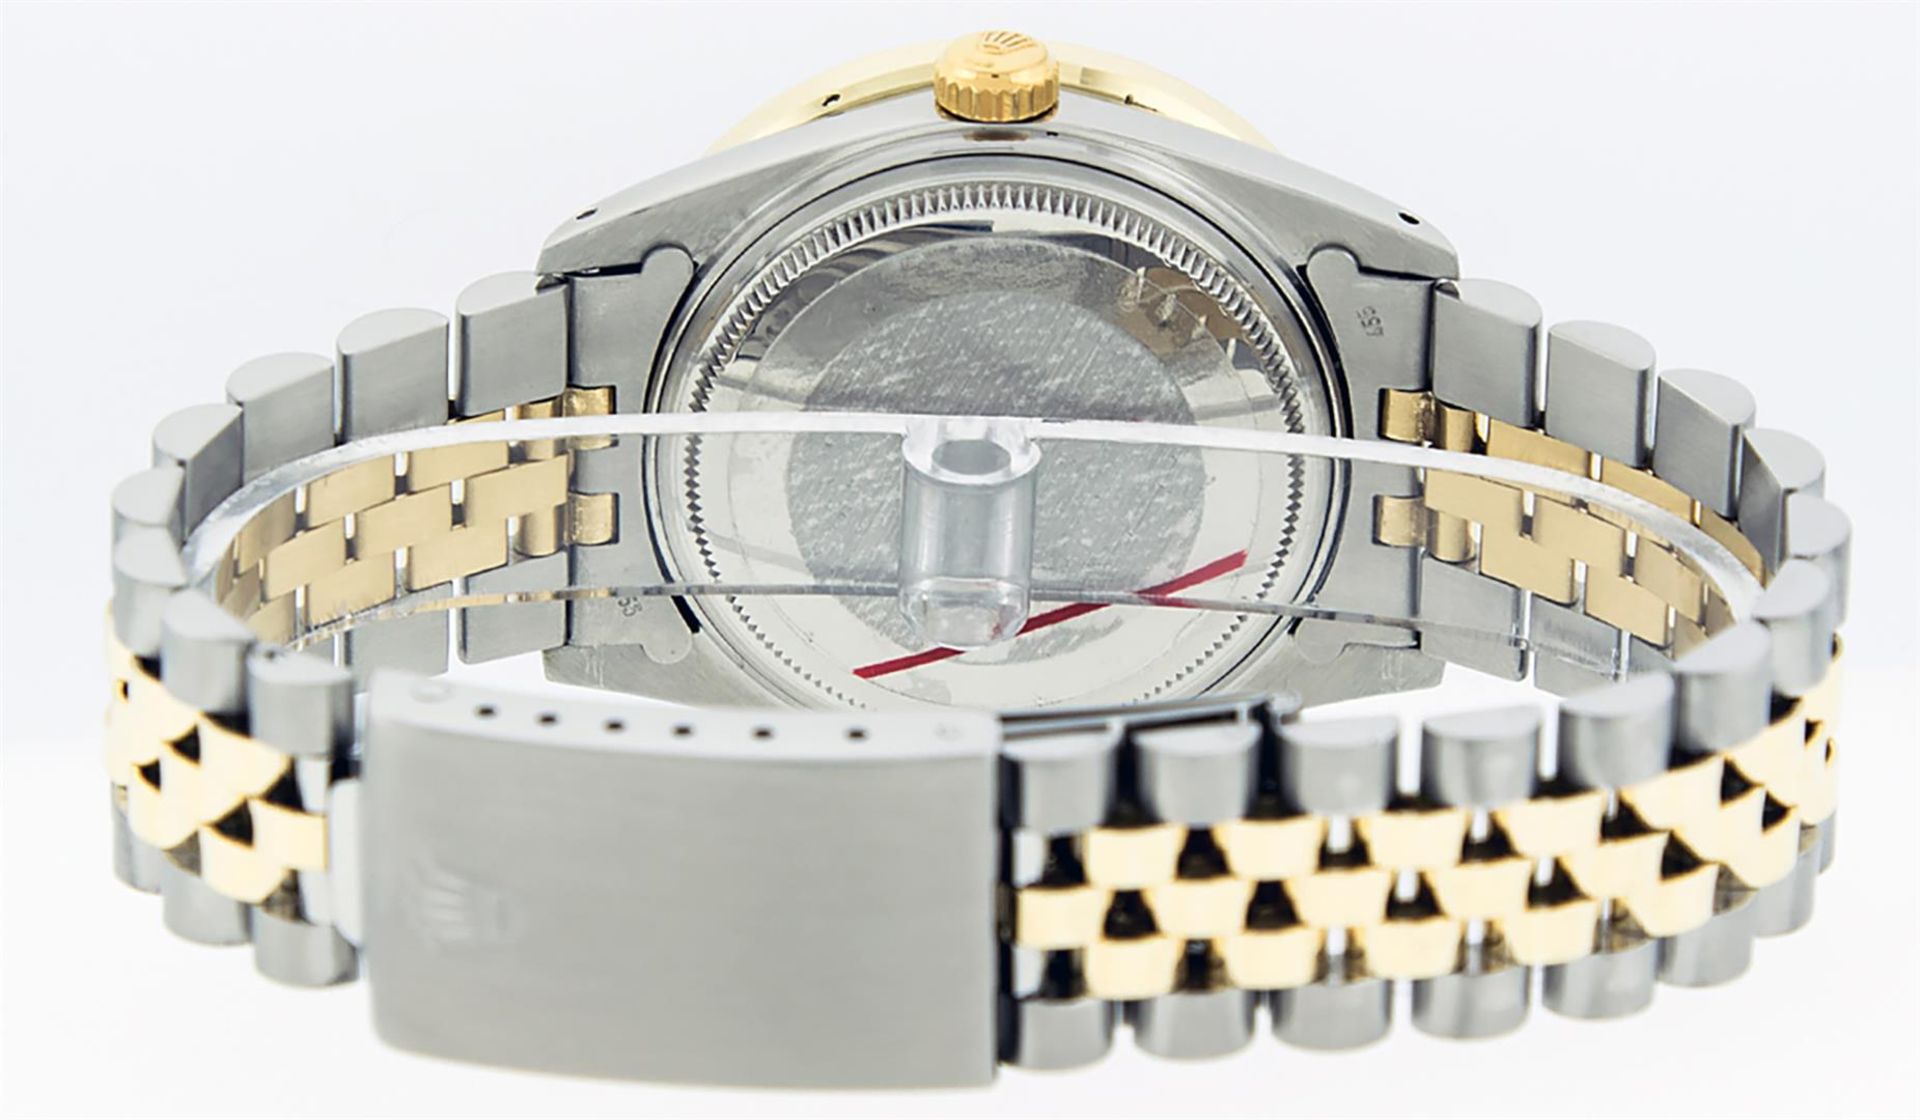 Rolex Mens 2 Tone Mother Of Pearl 3ctw Channel Set Diamond Datejust Wristwatch - Image 7 of 9